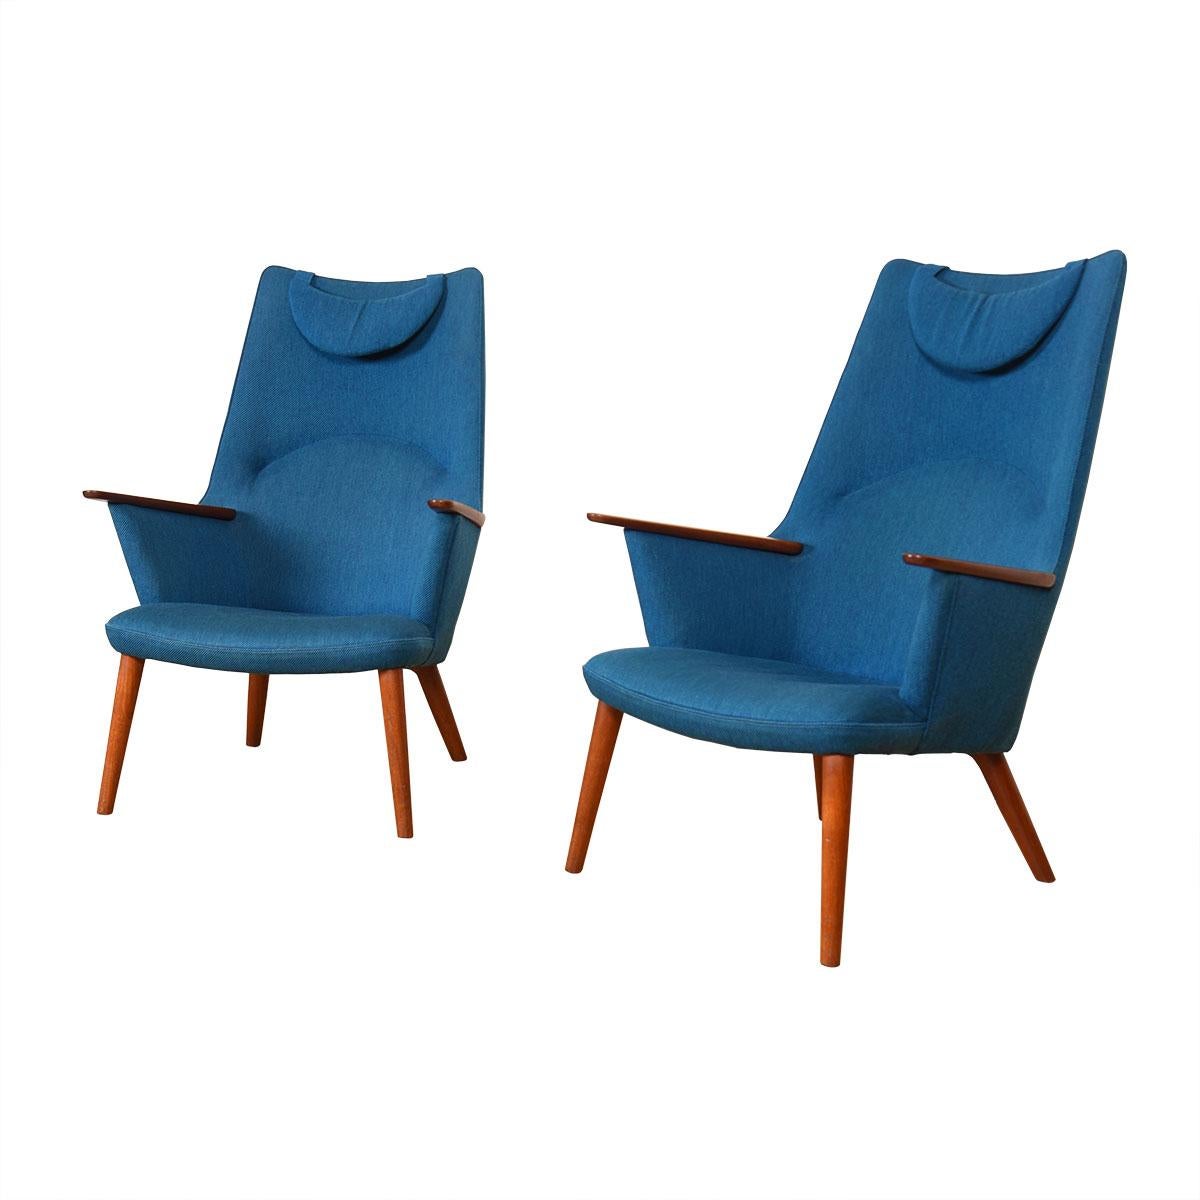 20th Century Pair of Hans Wegner “Mama Bear” AP-27 Easy Lounge Chairs for A. P. Stolen